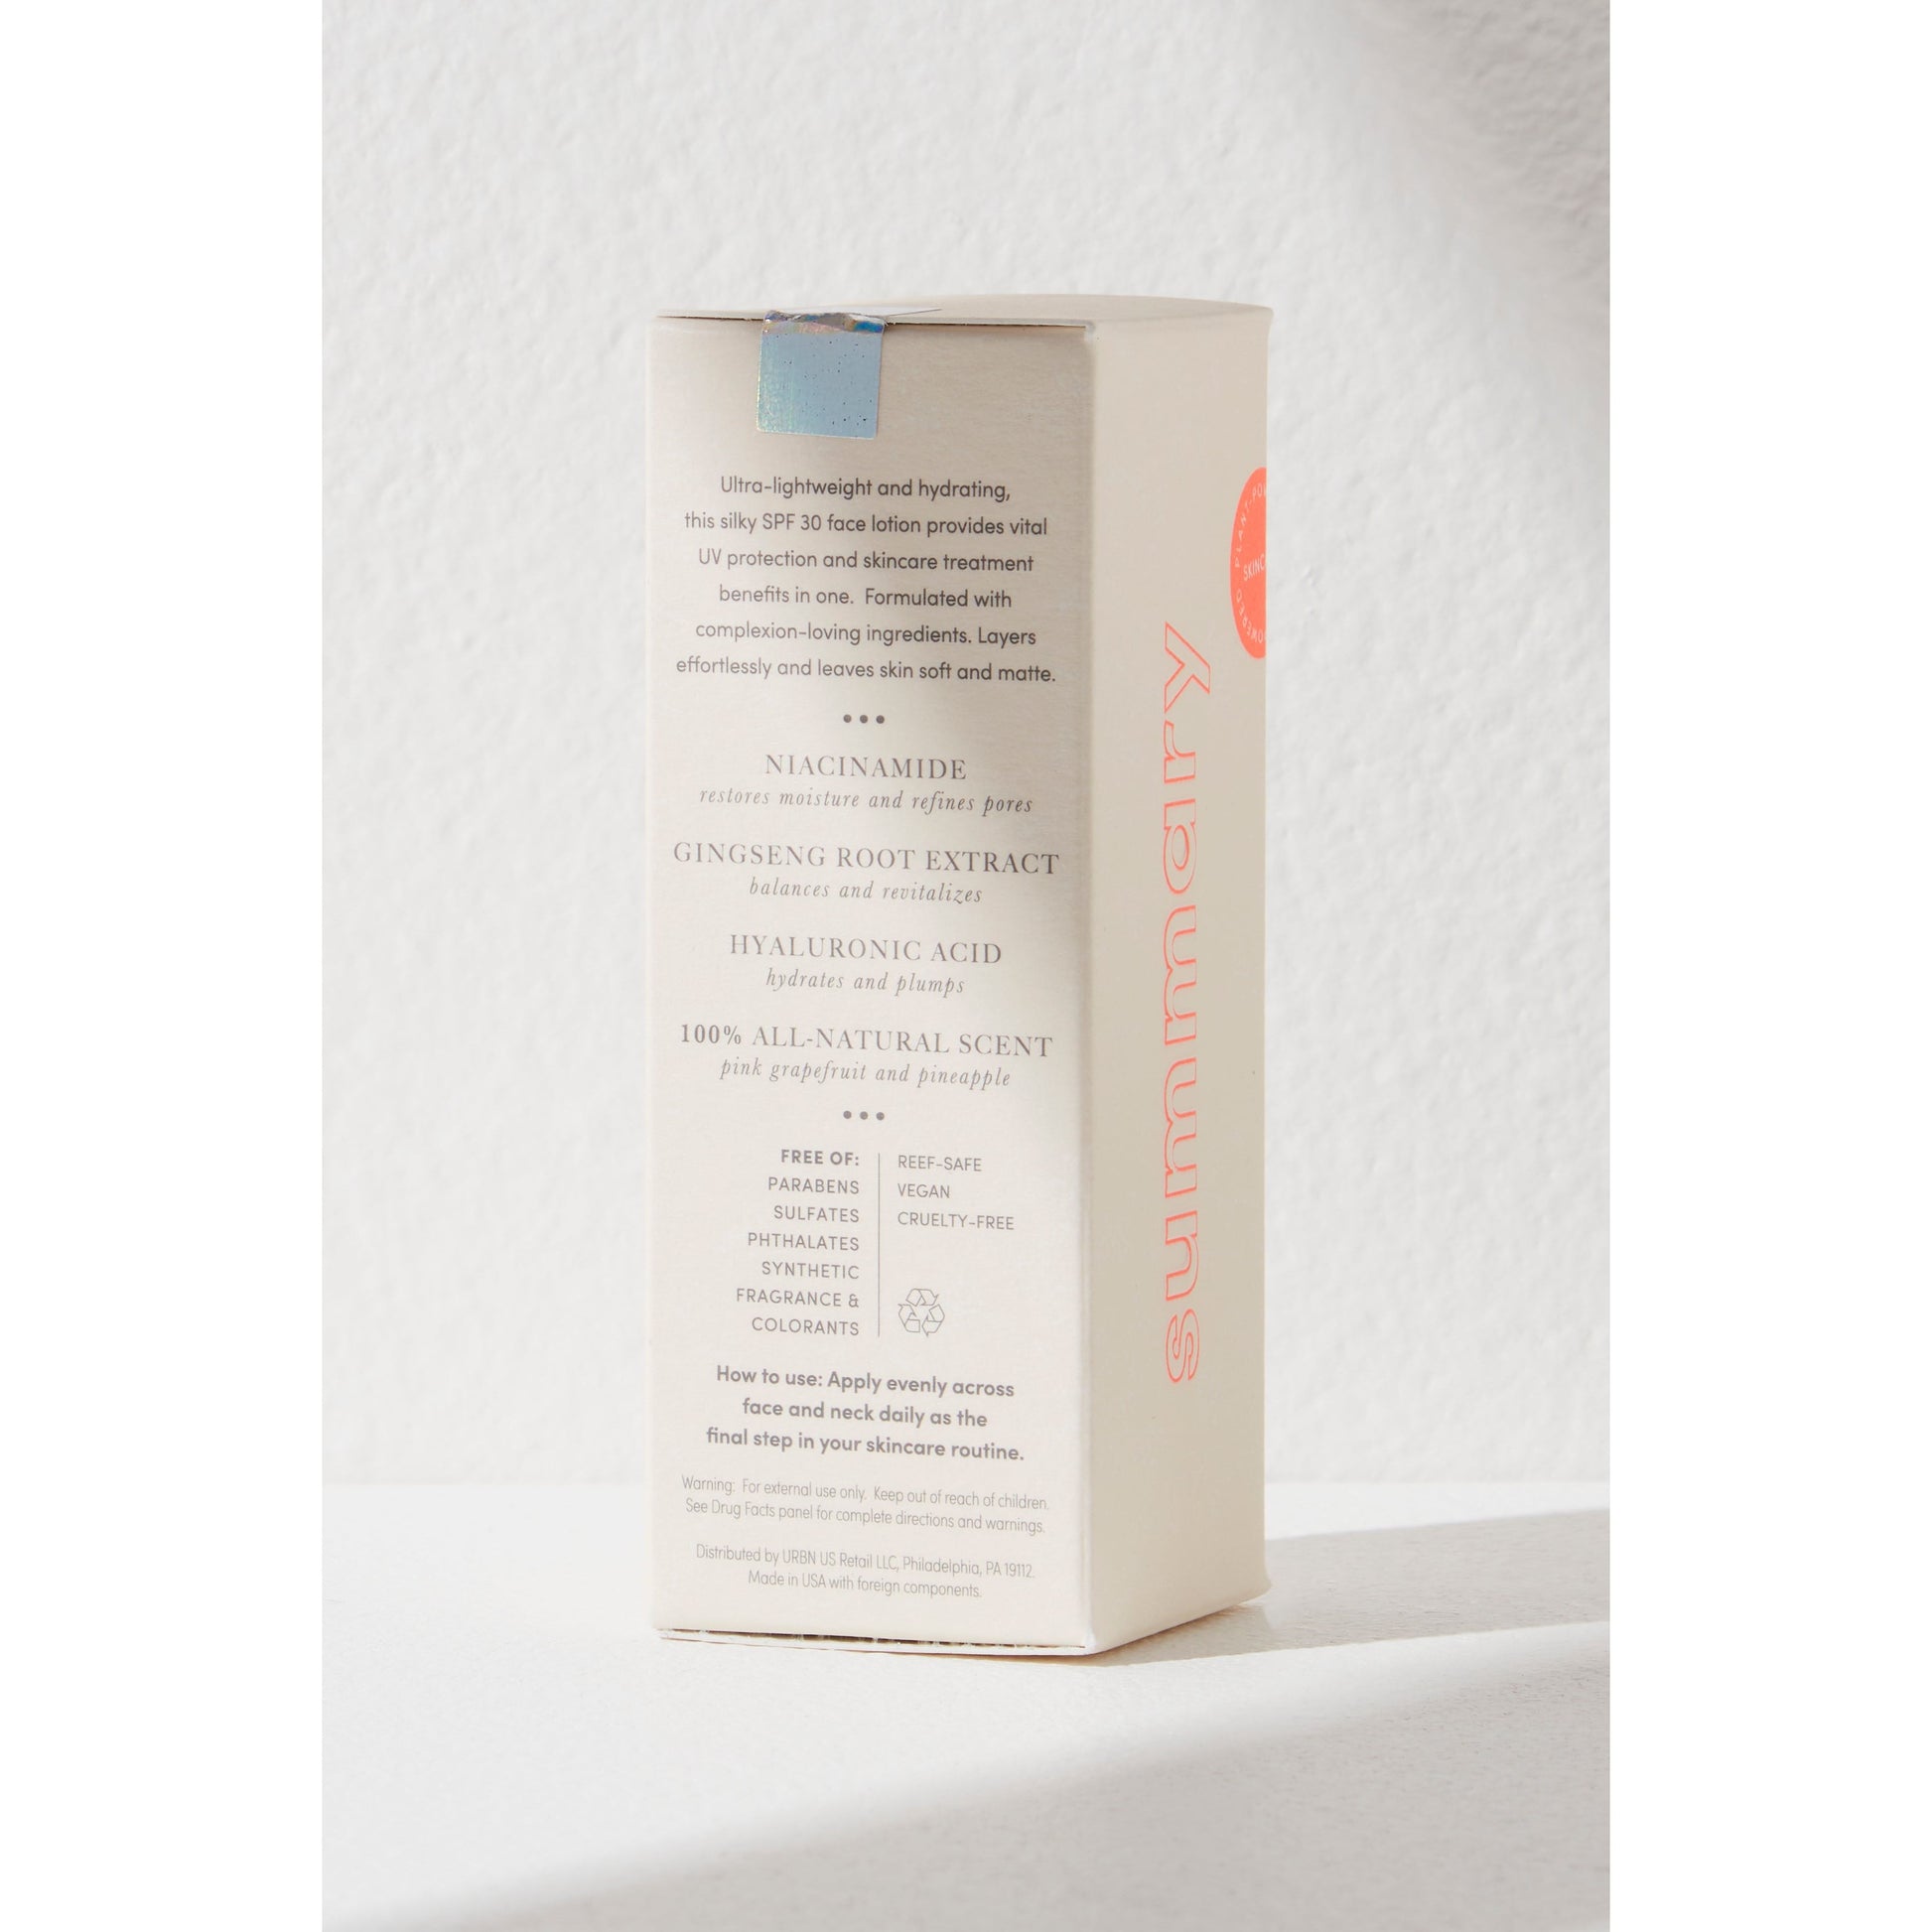 A box of Free People Movement Summary SPF 30 standing against a white textured background. The box lists ingredients and benefits like SPF 30 protection and hyaluronic acid.